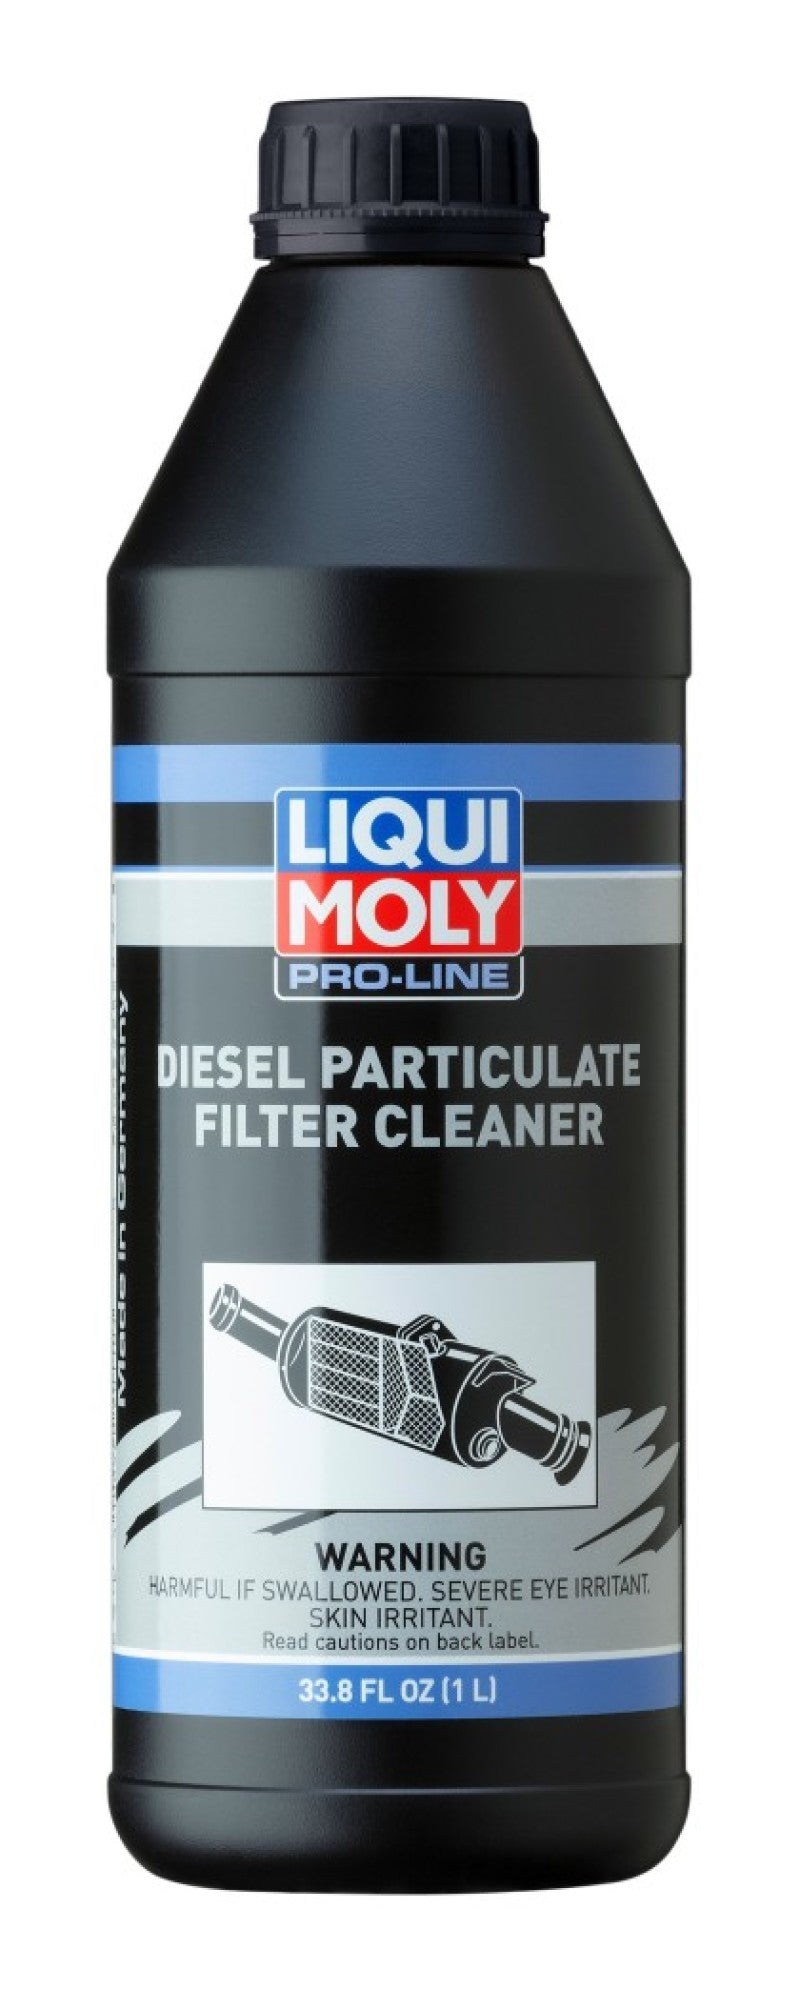 LIQUI MOLY 1L Pro-Line Diesel Particulate Filter Cleaner - Single.